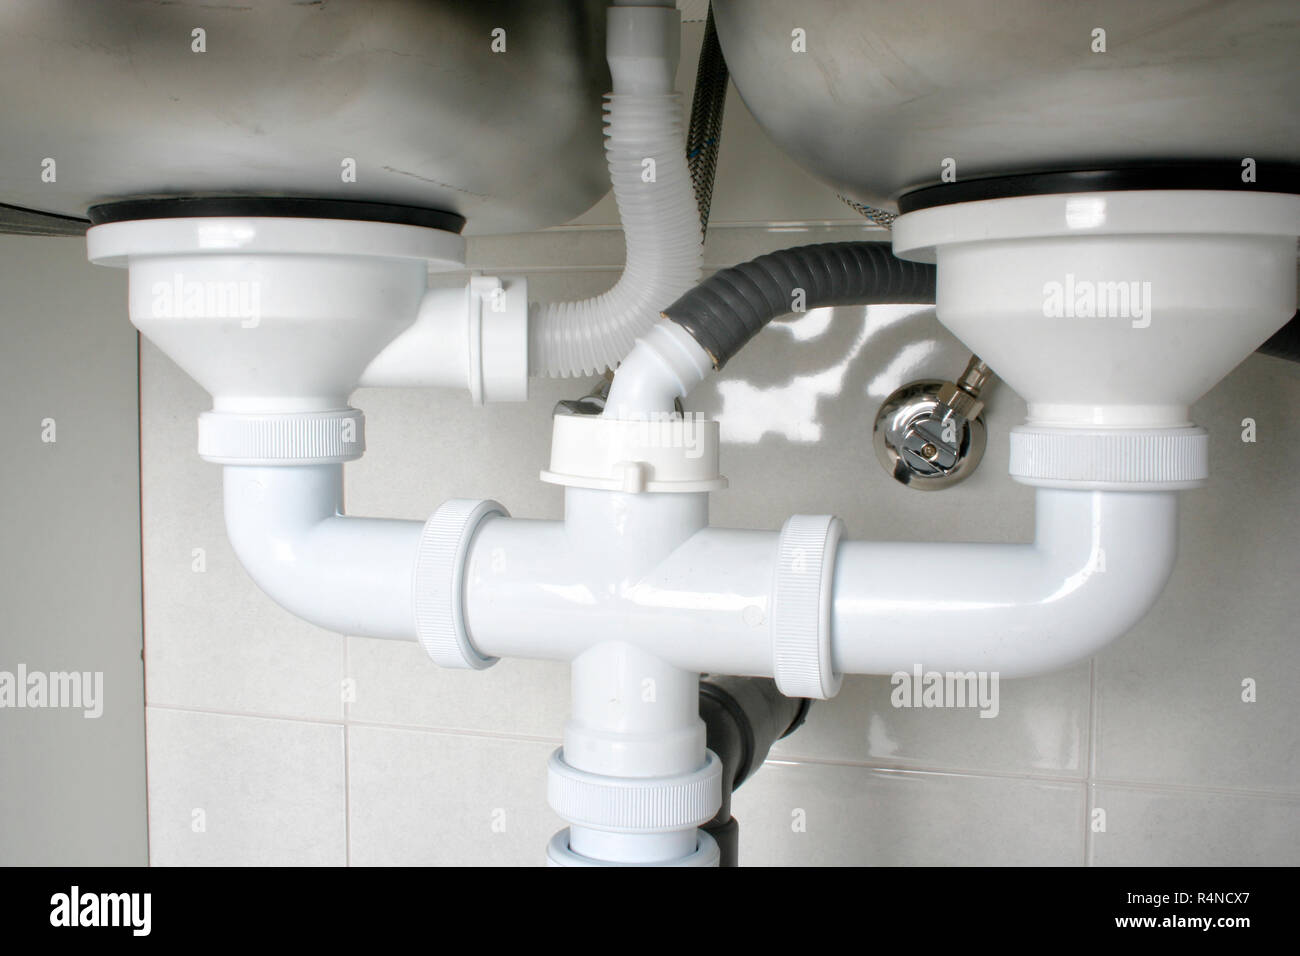 View of the drain pipes of a kitchen sink with dishwasher connection Stock  Photo - Alamy